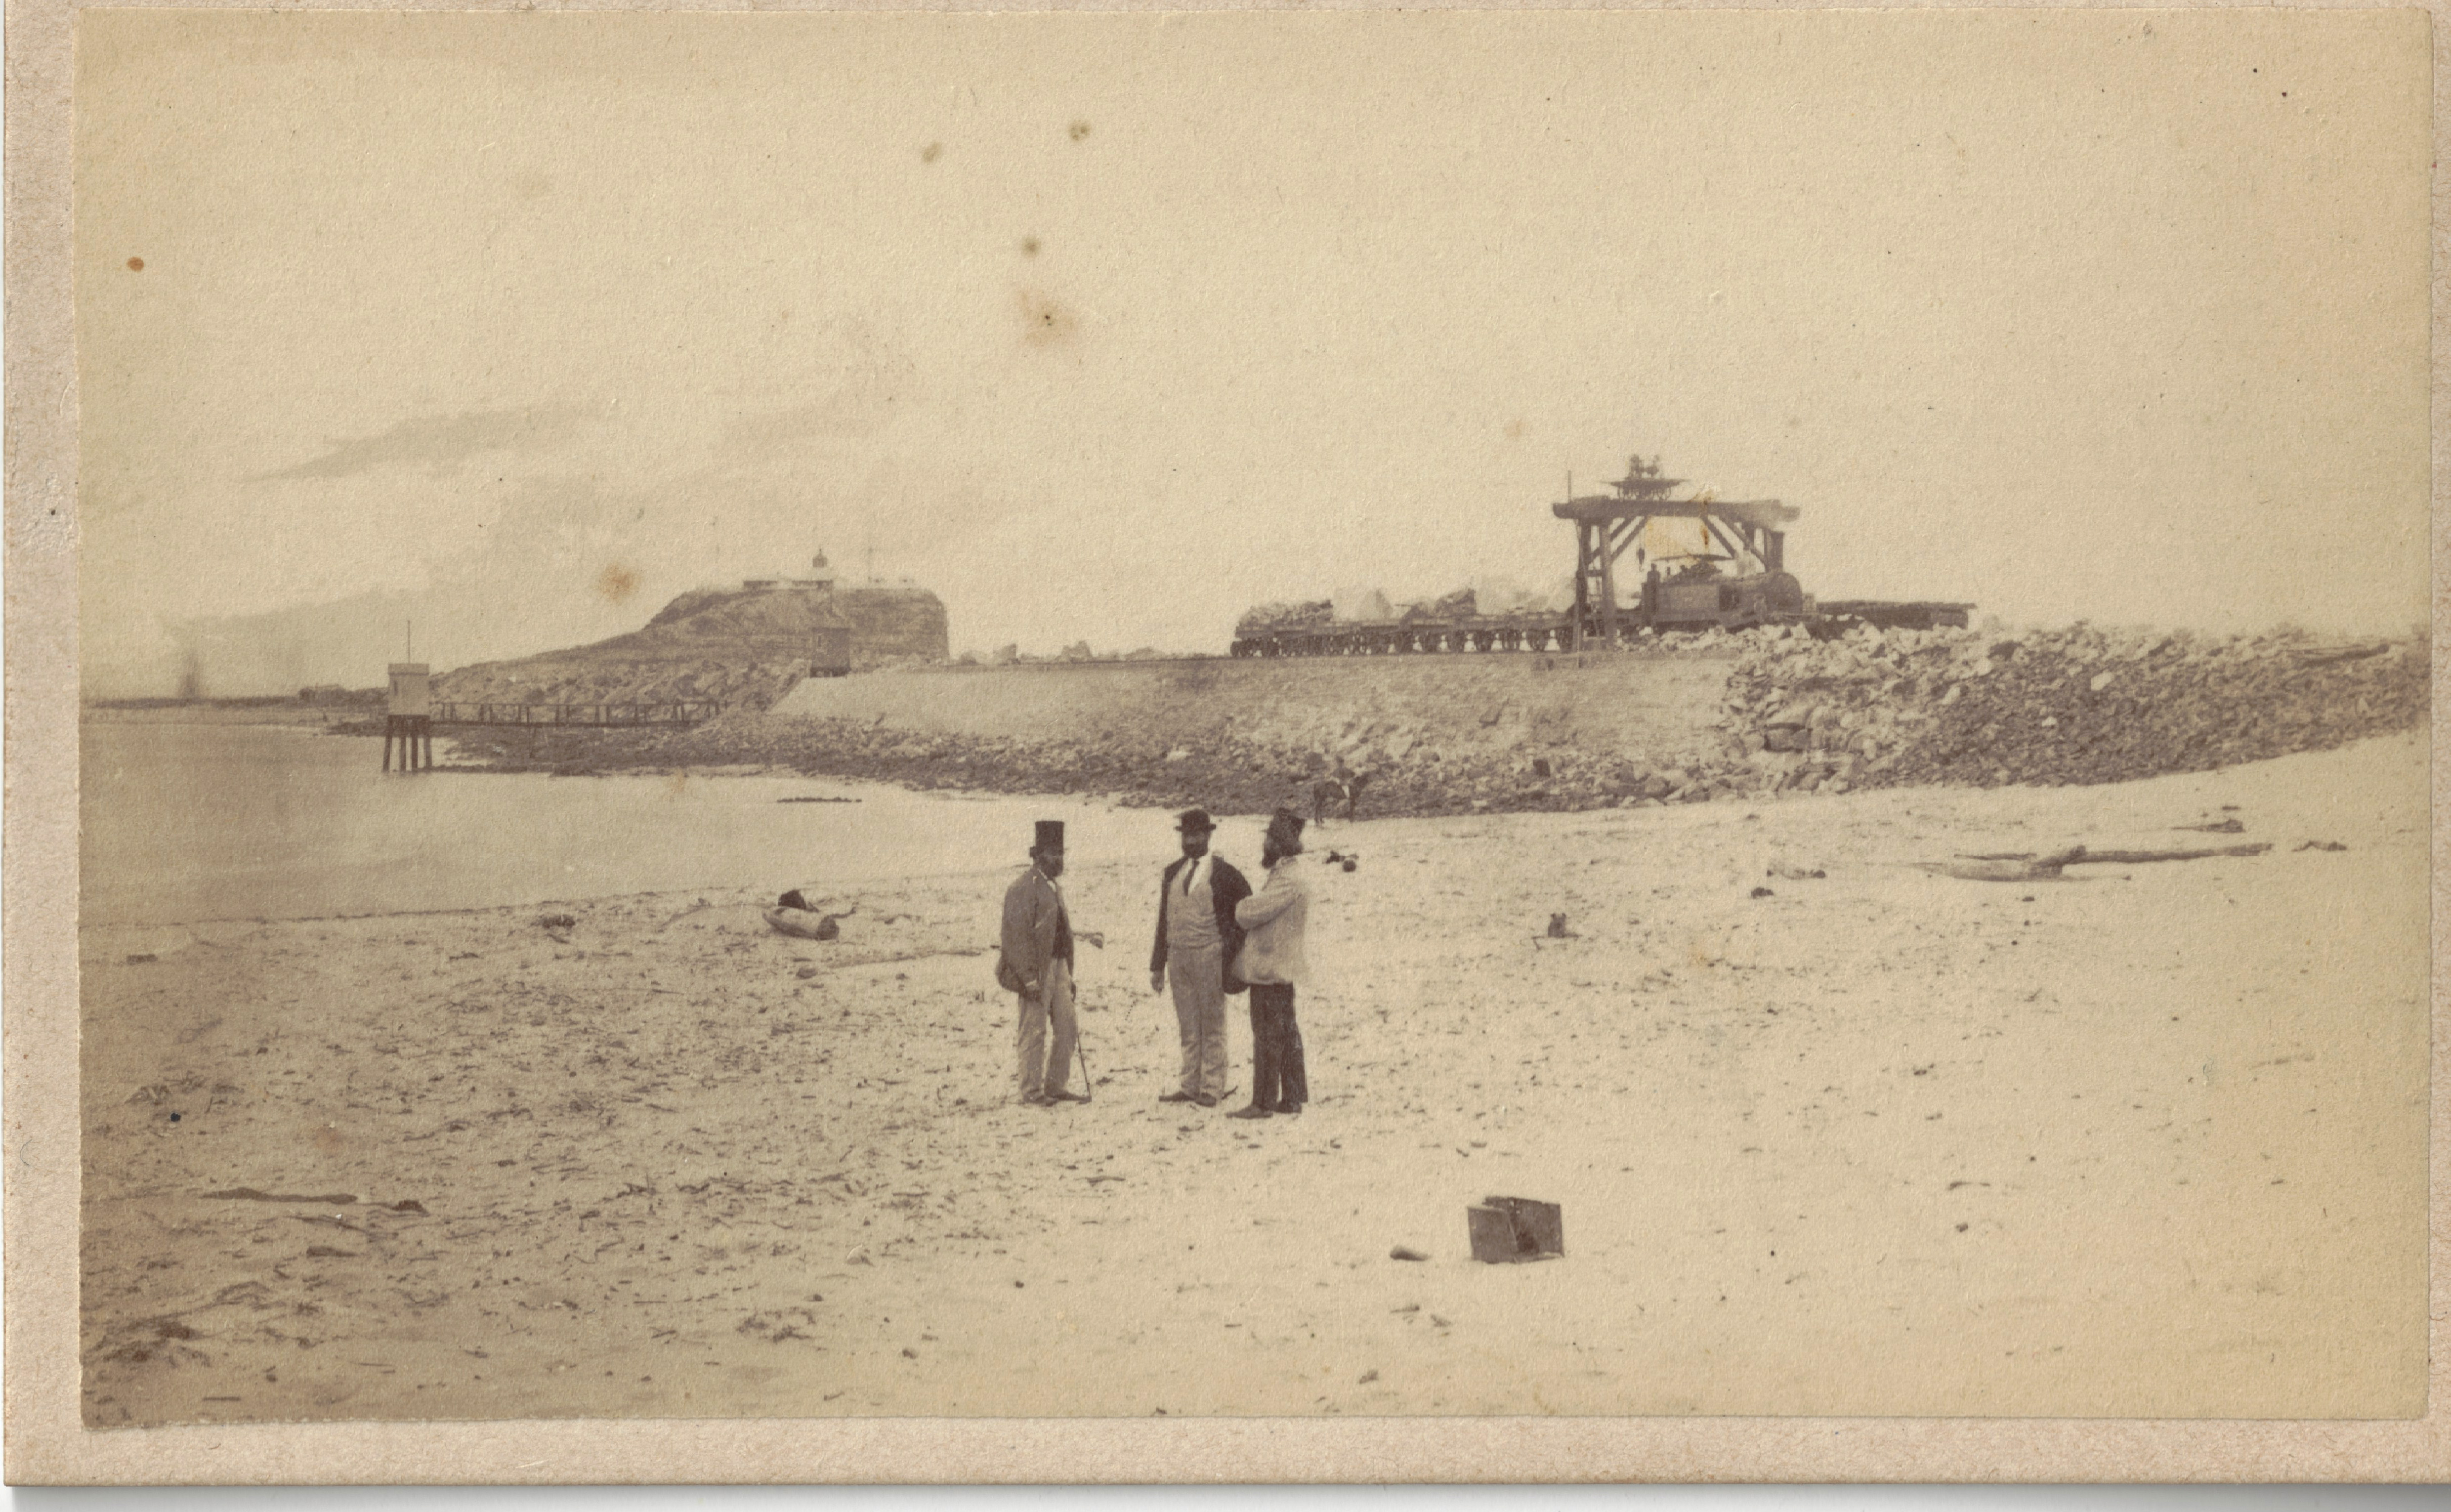 Newcastle Breakwater, circa 22 October 1870 - 1 December 1870 (Photo Credit: Digitised by Anne Glennie from Glennie Family Albums) Click for larger view